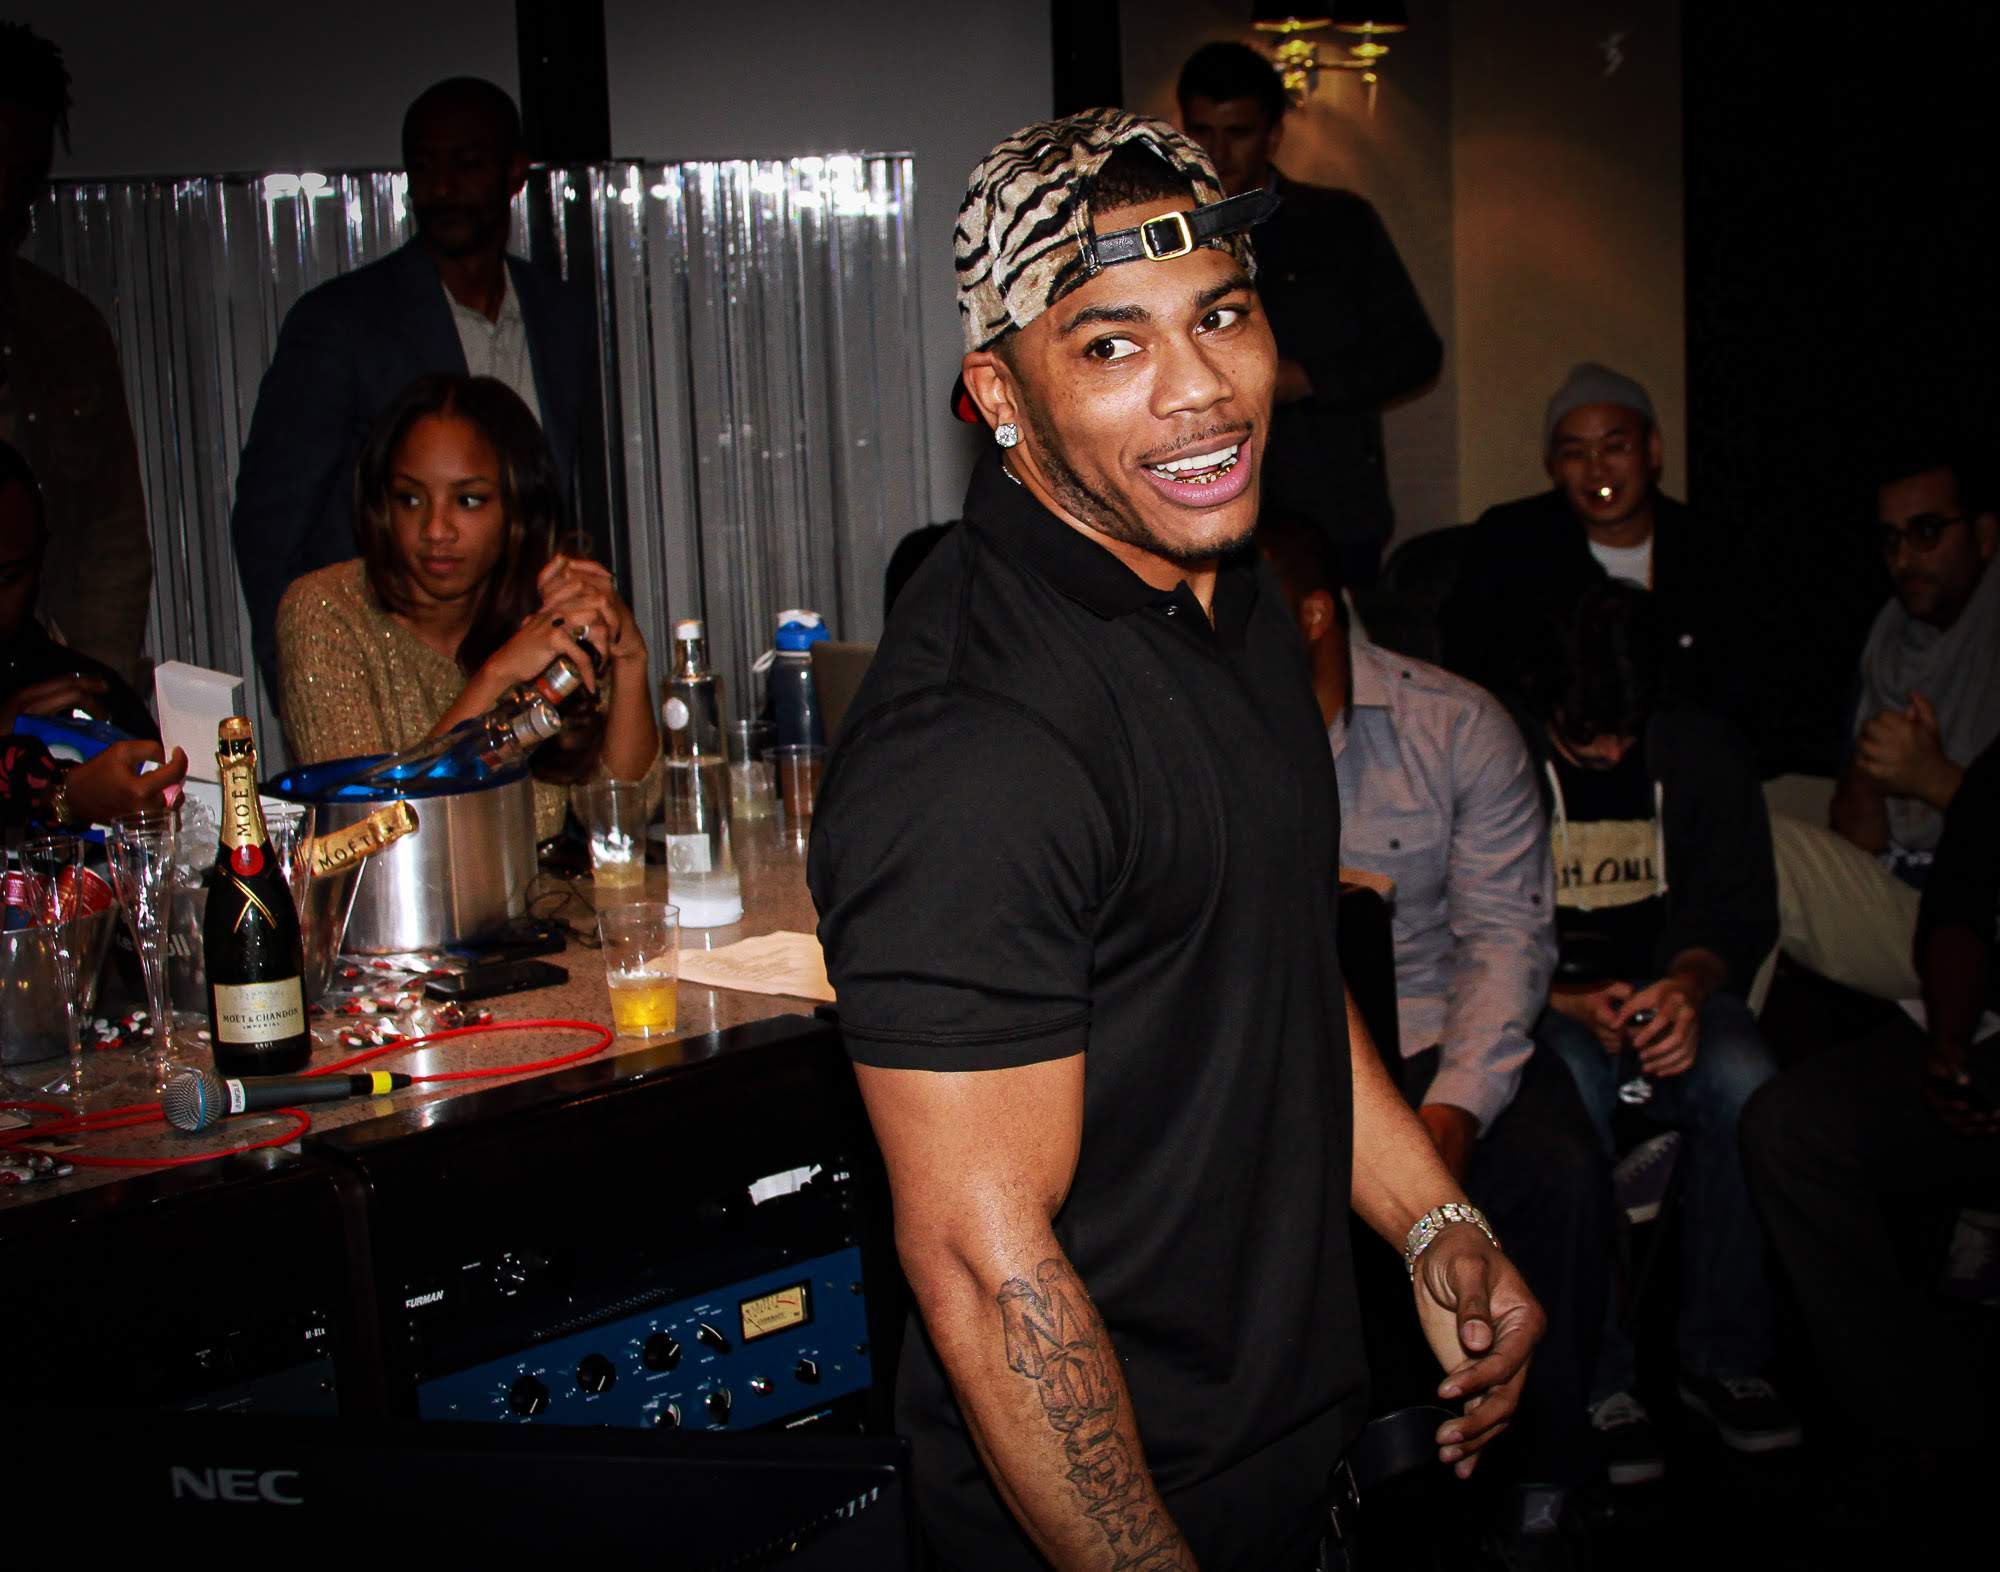 Nelly Fans Are Lusting Over His Looks & Giving Him Props For His Career